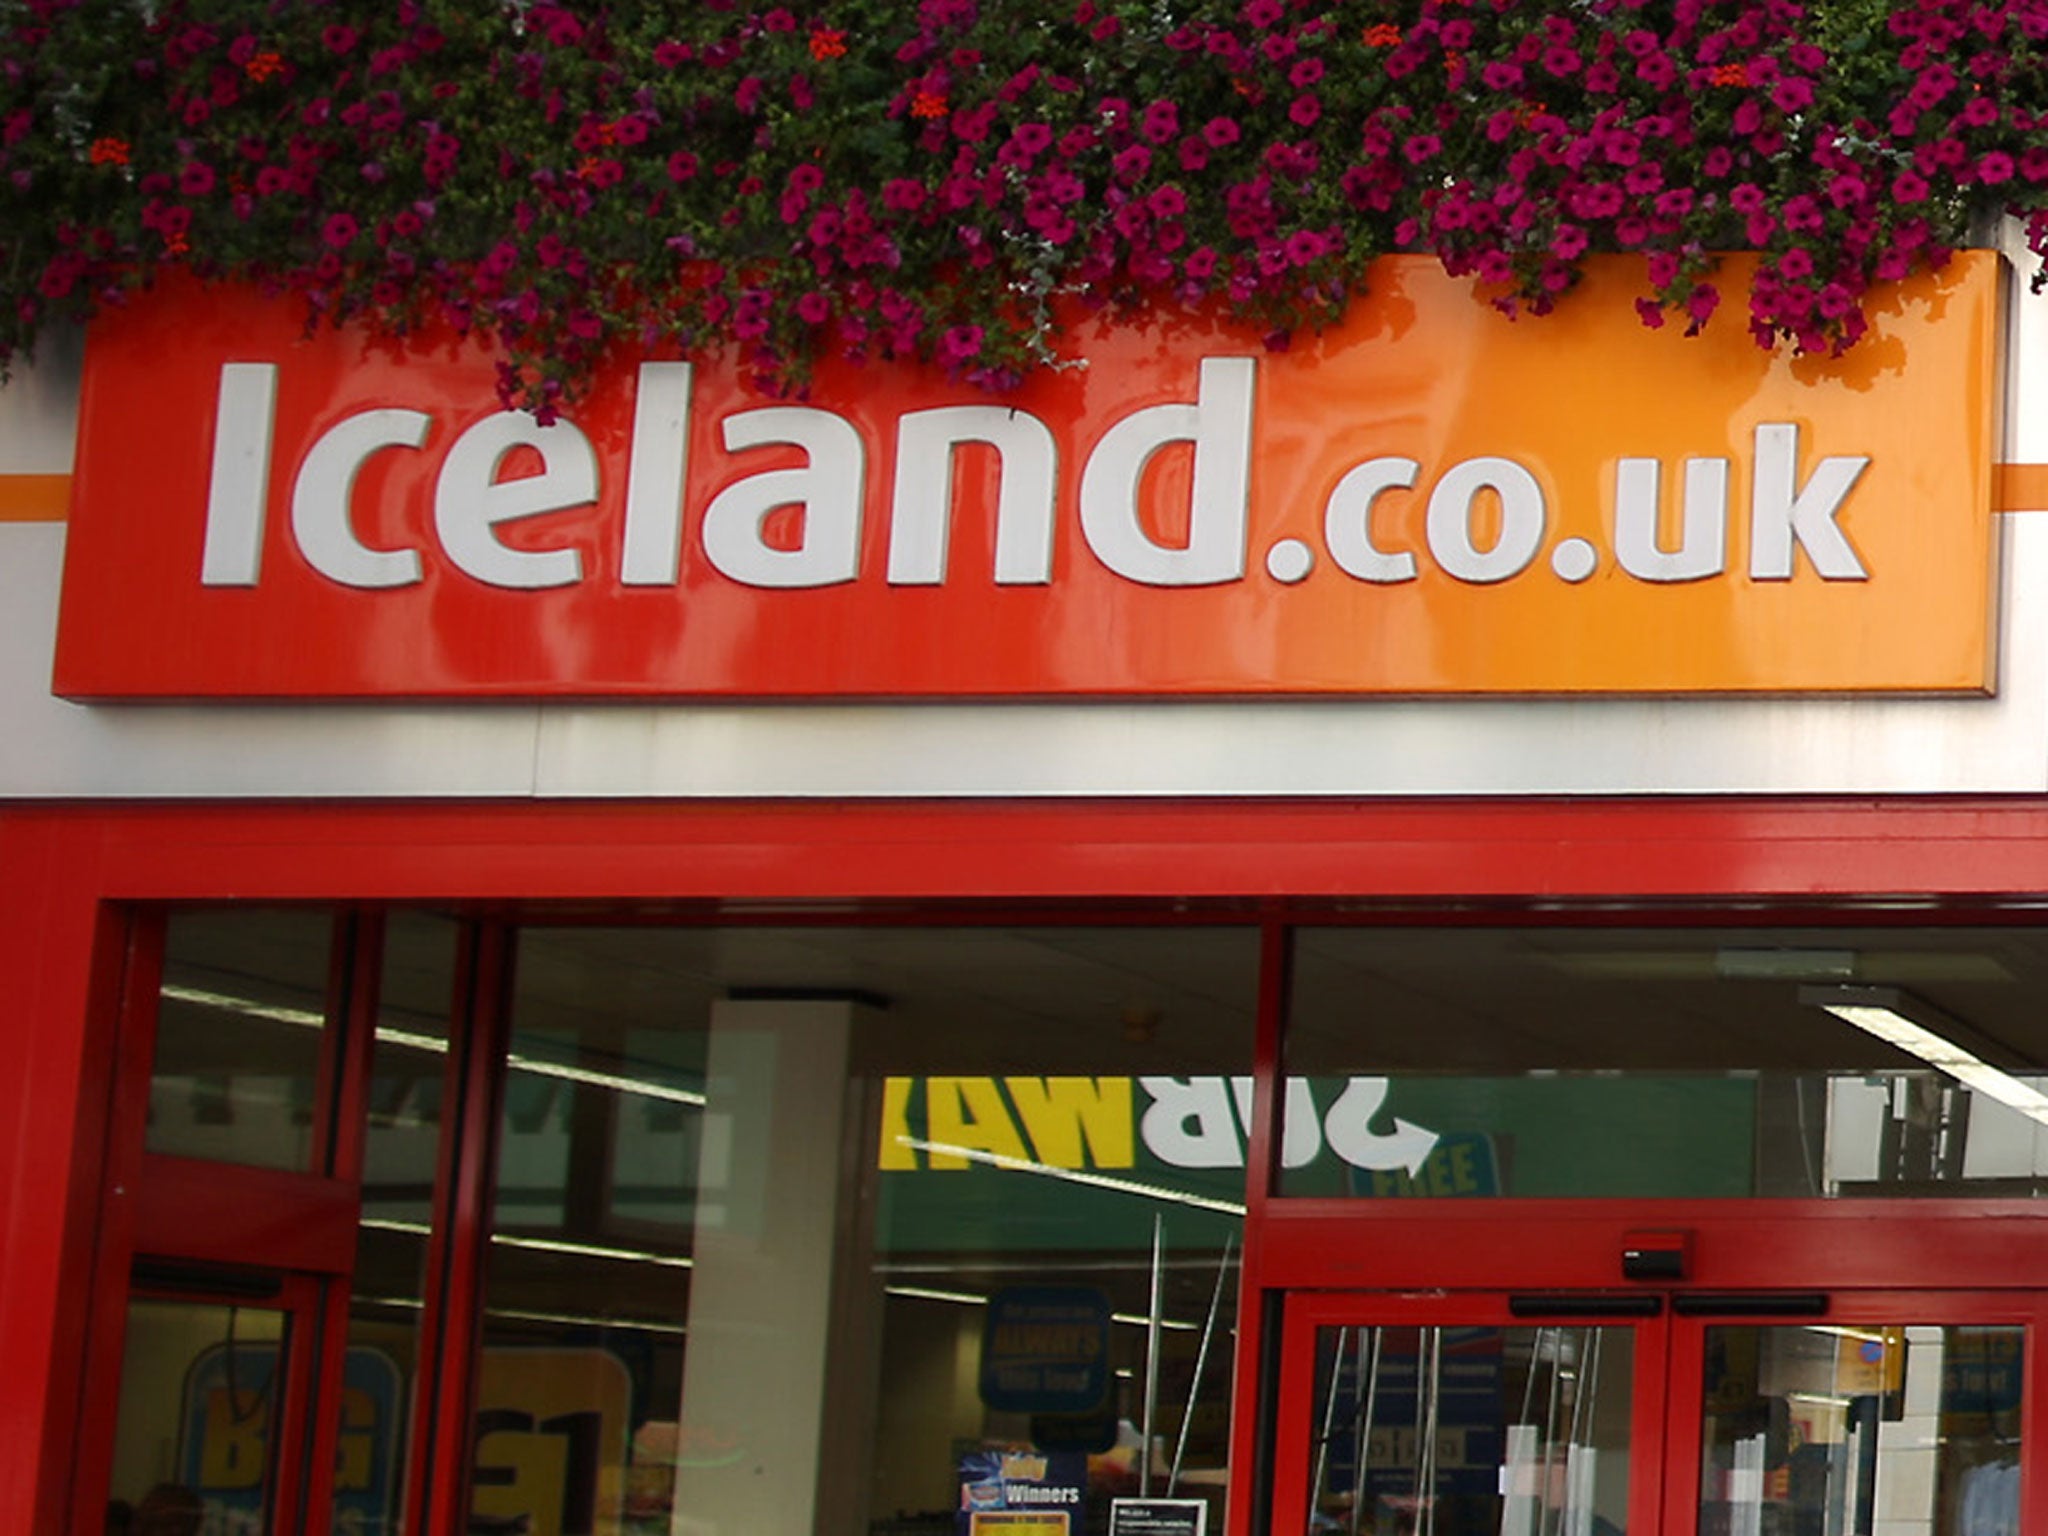 Charges against three men accused of stealing from waste-bins outside an Iceland store in London have been cleared by the CPS.